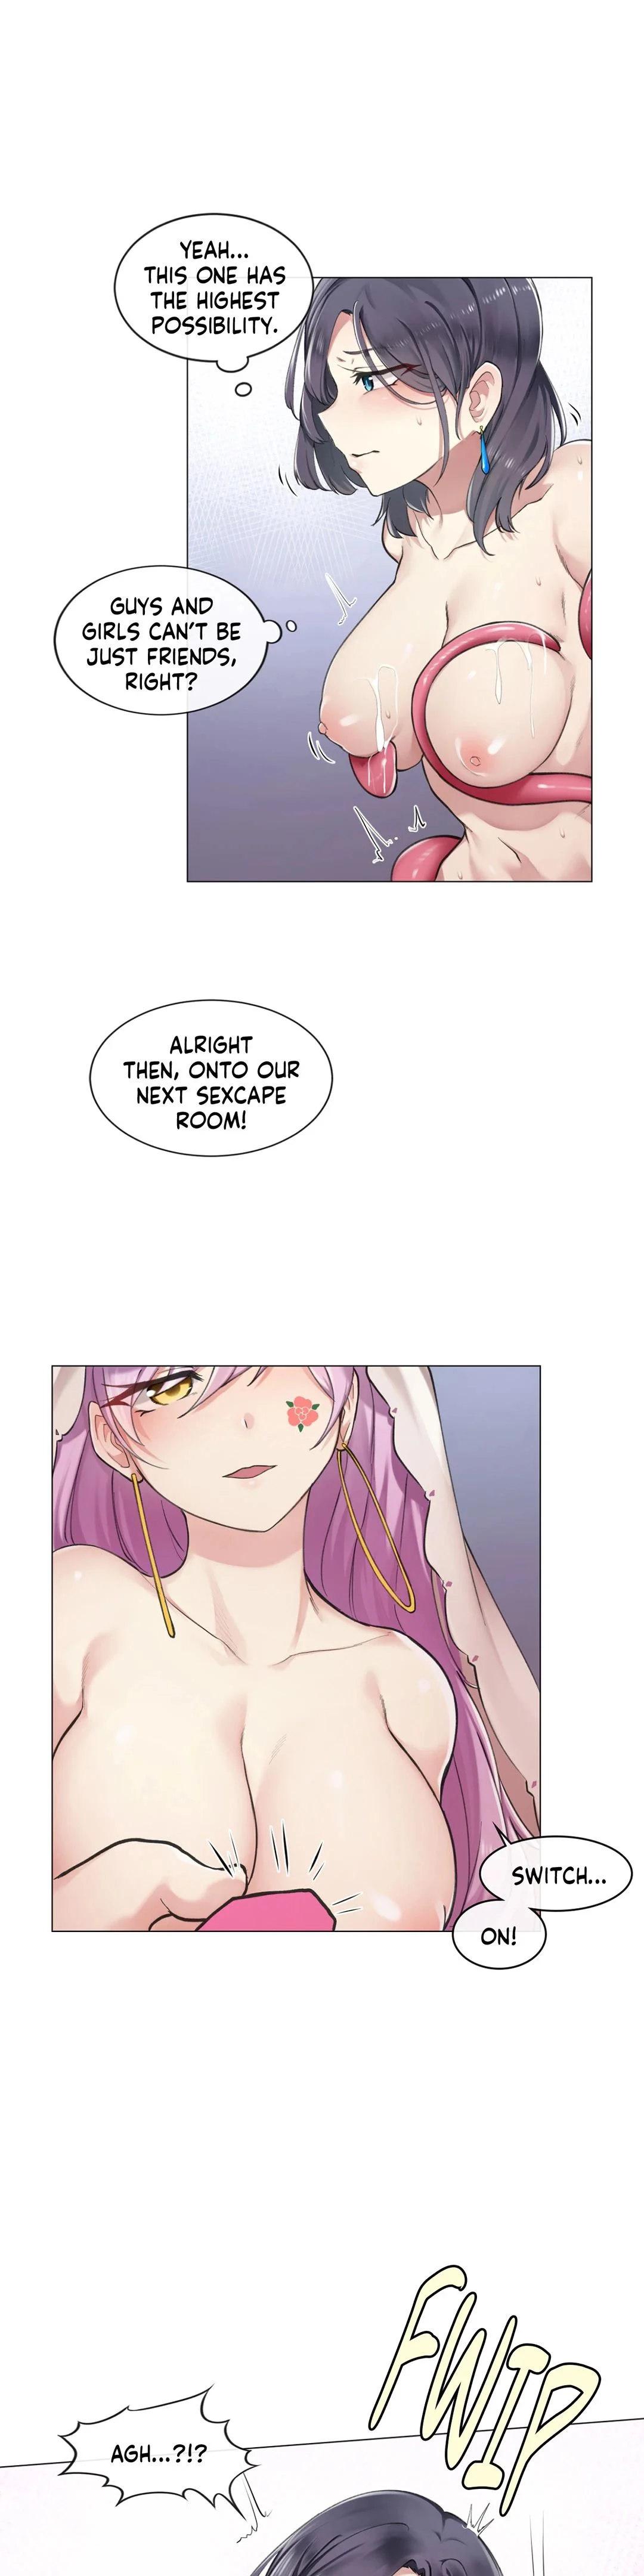 [Dumangoon, KONG_] Sexcape Room: Snap Off Ch.7/7 [English] [Manhwa PDF] Completed 7